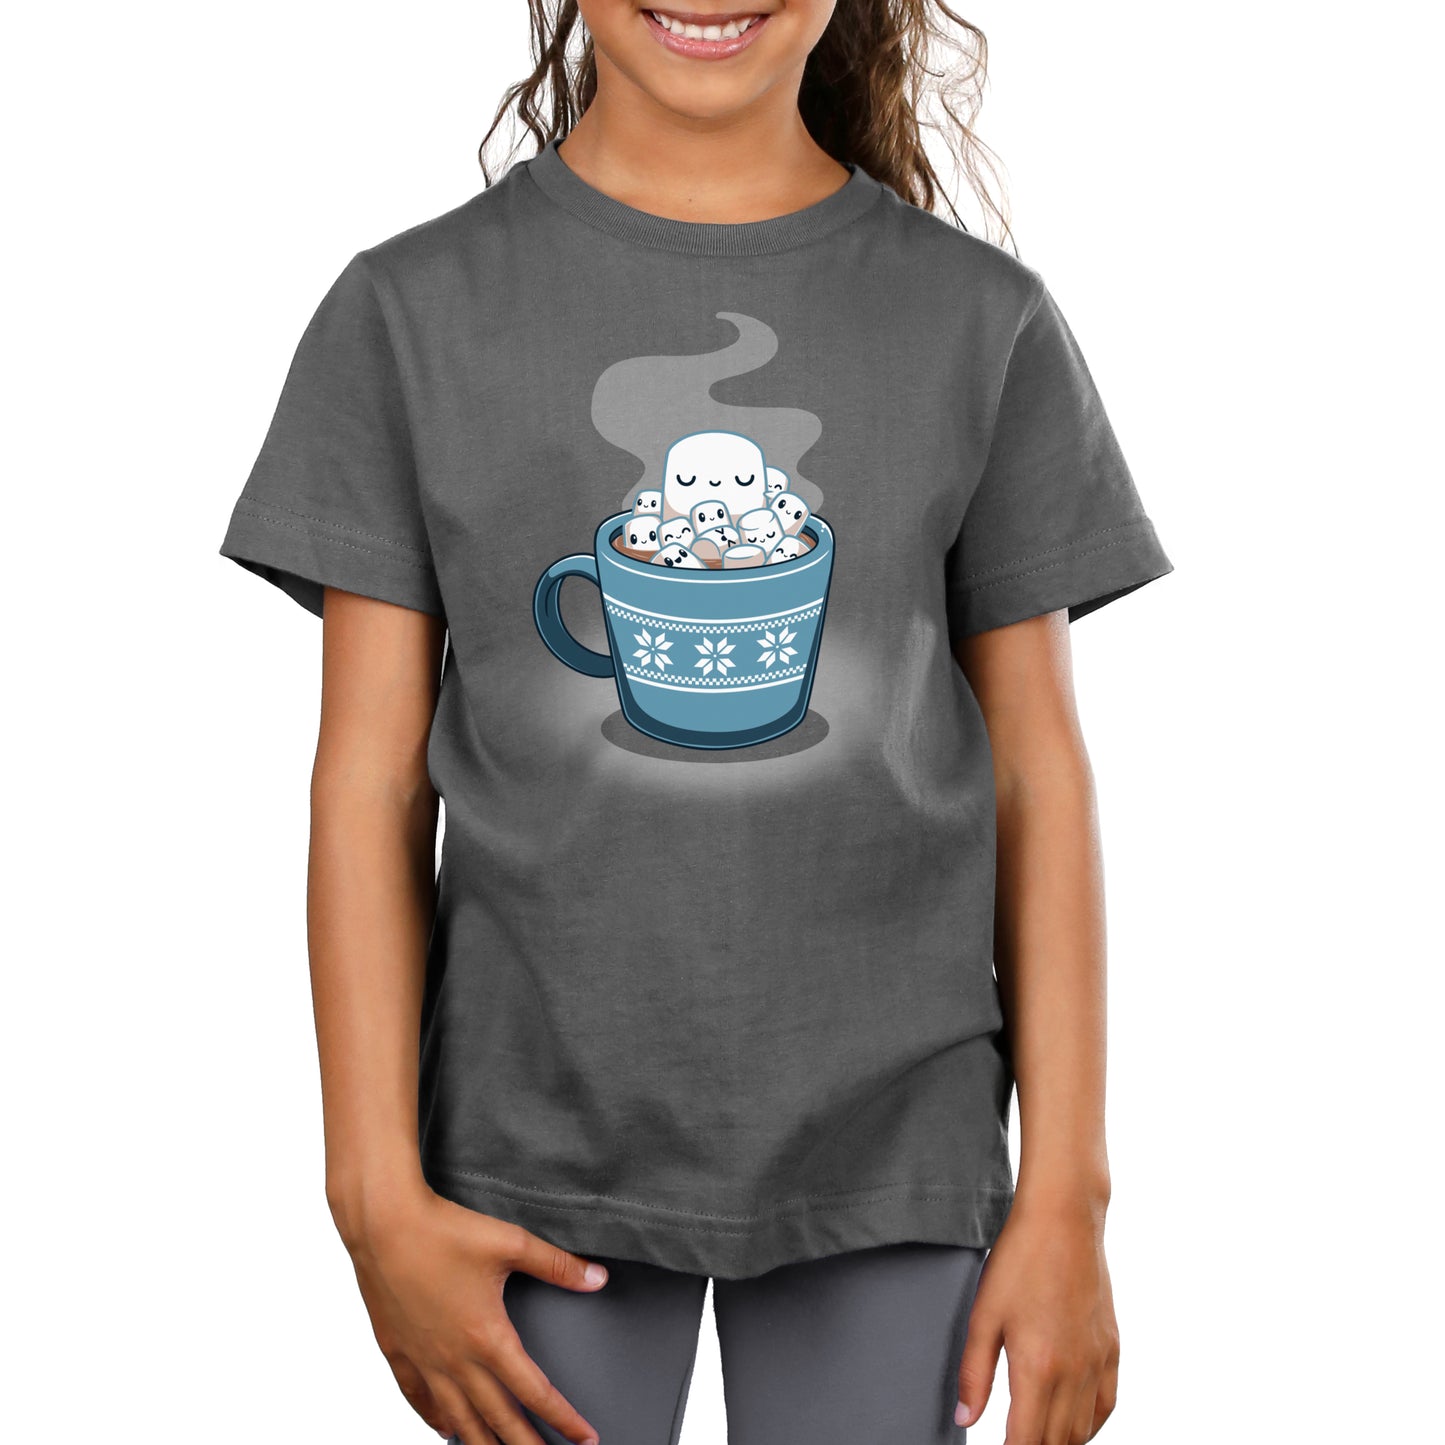 A girl wearing a comfortable TeeTurtle Snug in a Mug t-shirt with a cup of coffee.